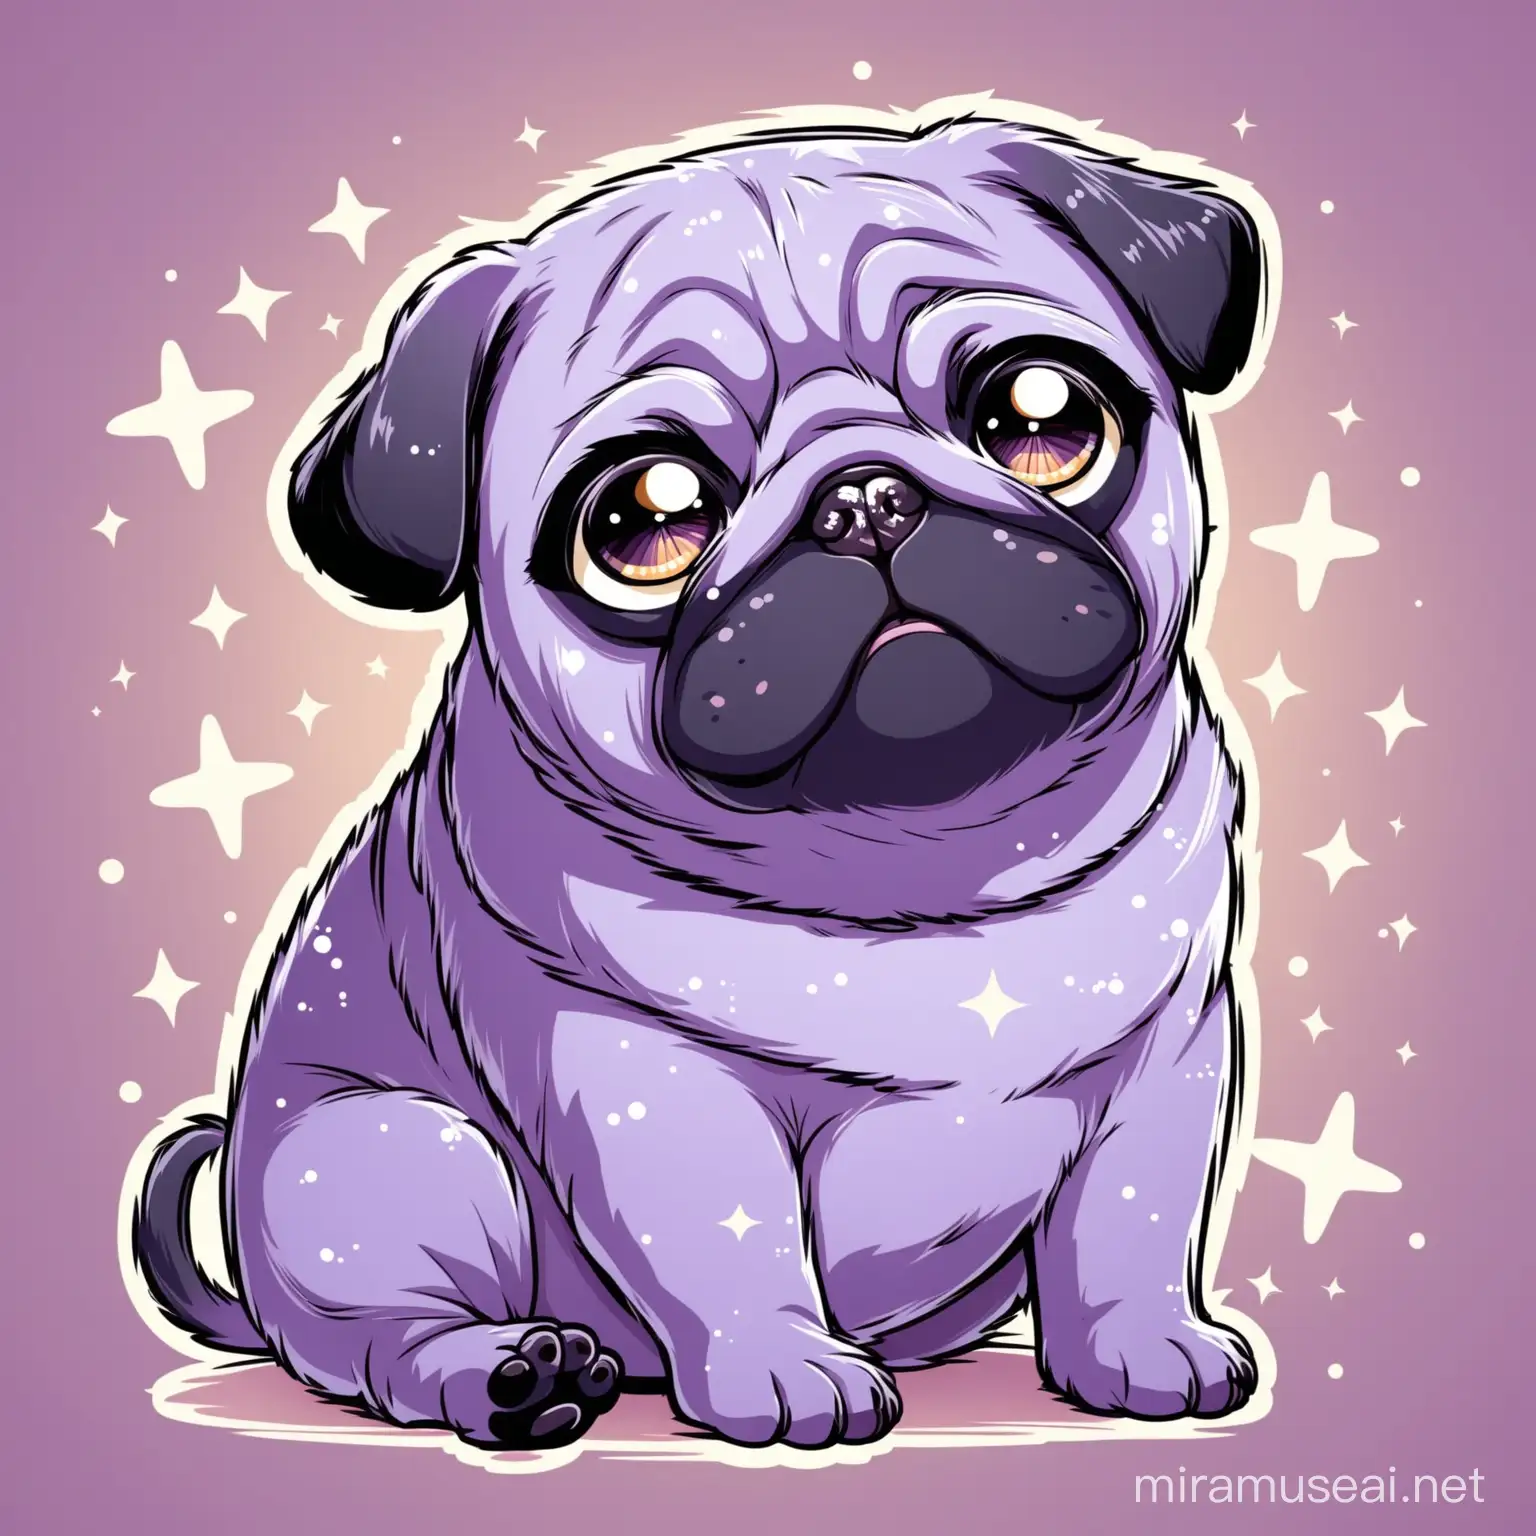  a charming purple pug with large, expressive eyes that seem to sparkle with mischief. Its coat is a deep shade of purple, with soft fur that begs to be petted. The pug's wrinkled face wears a friendly expression, and its floppy ears add to its endearing appearance. With a wag of its curly tail sitting on the left of a rectangular background